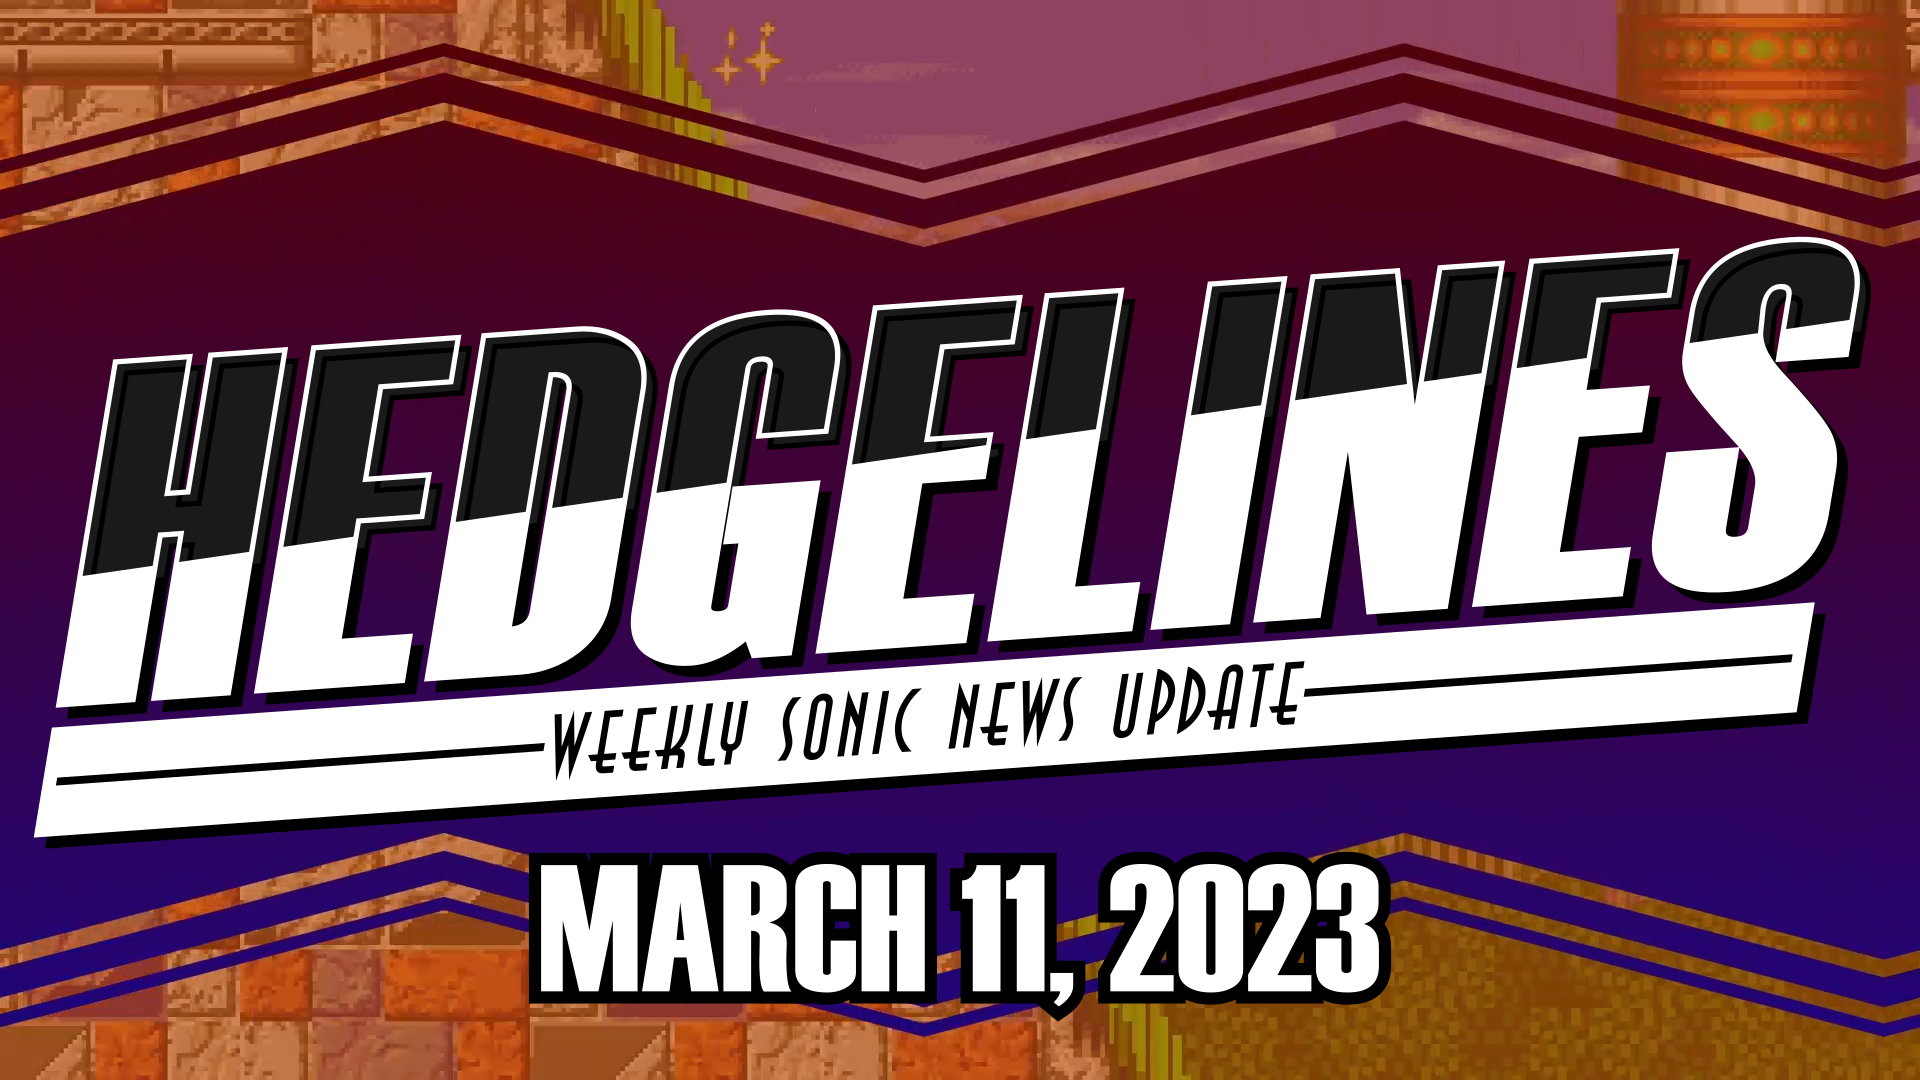 More information about "HedgeLines - Weekly News Recap - Mar. 11, 2023"